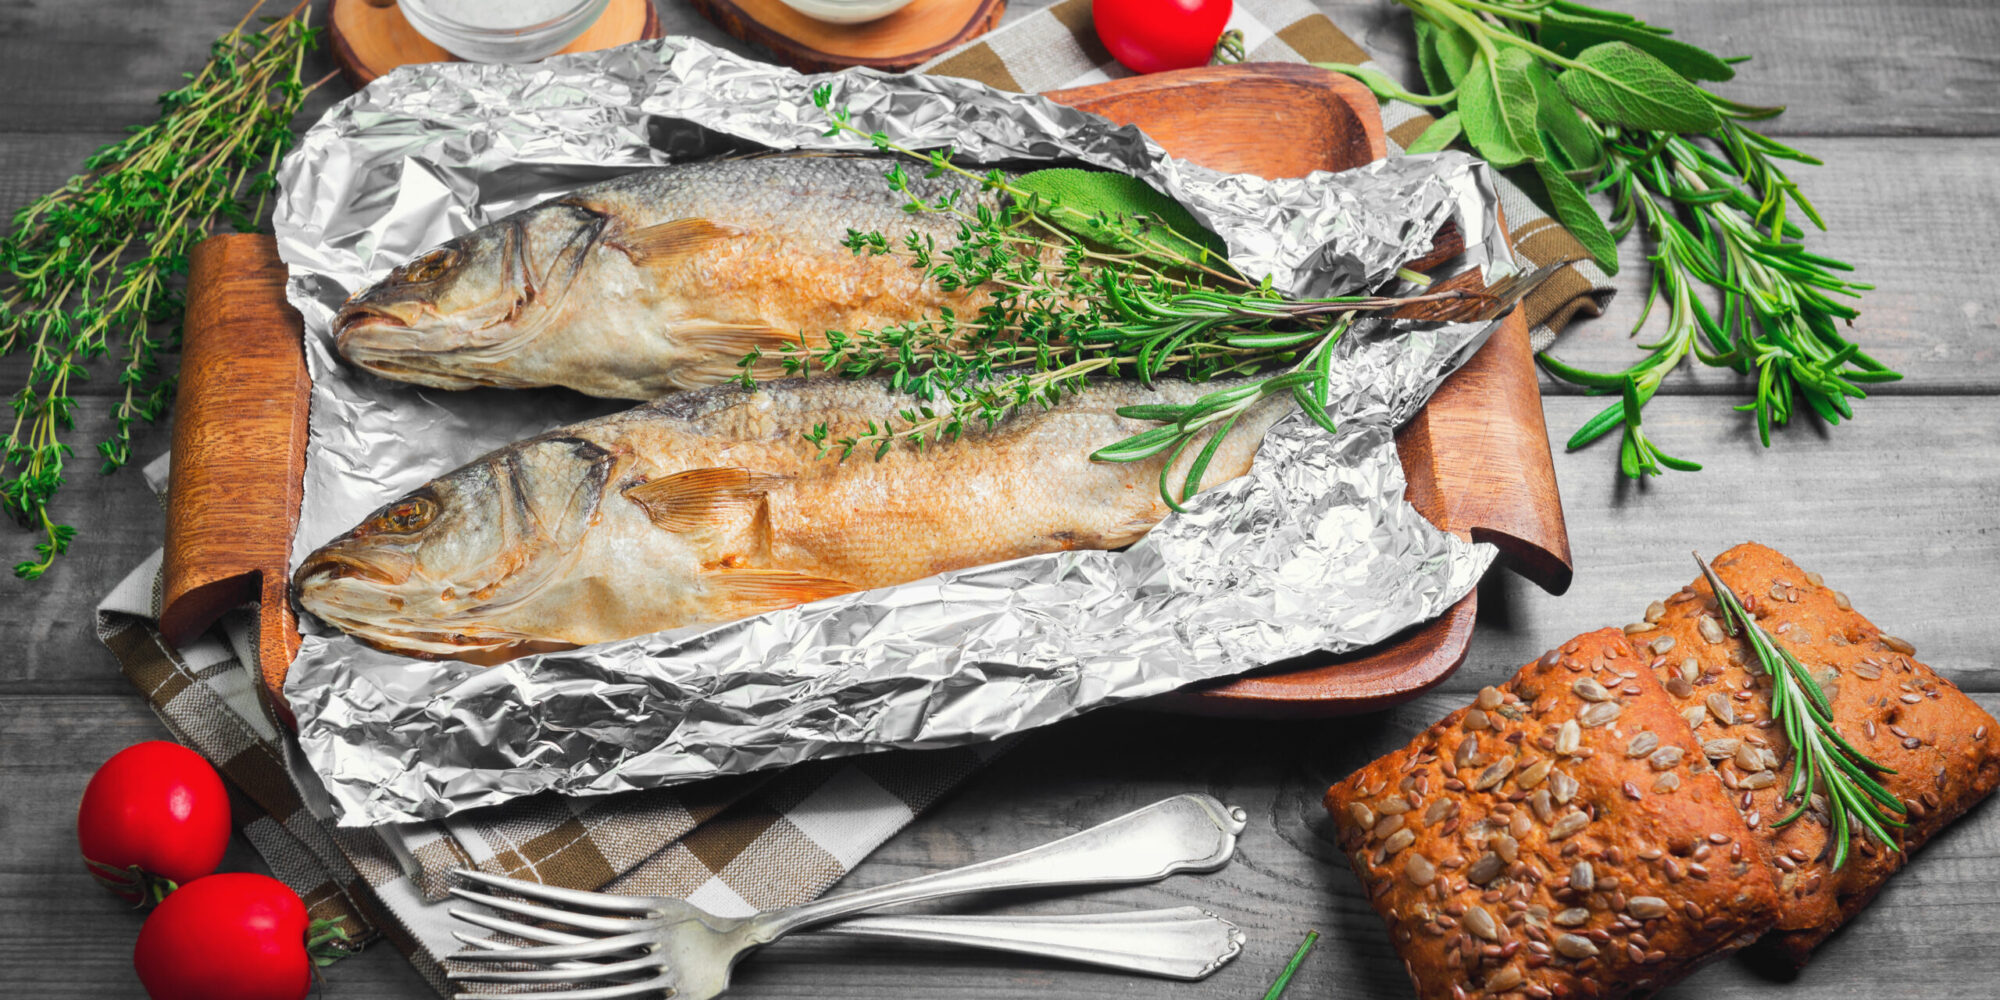 Two,Grilled,Whole,Fish,Trout,On,An,Aluminum,Foil,On